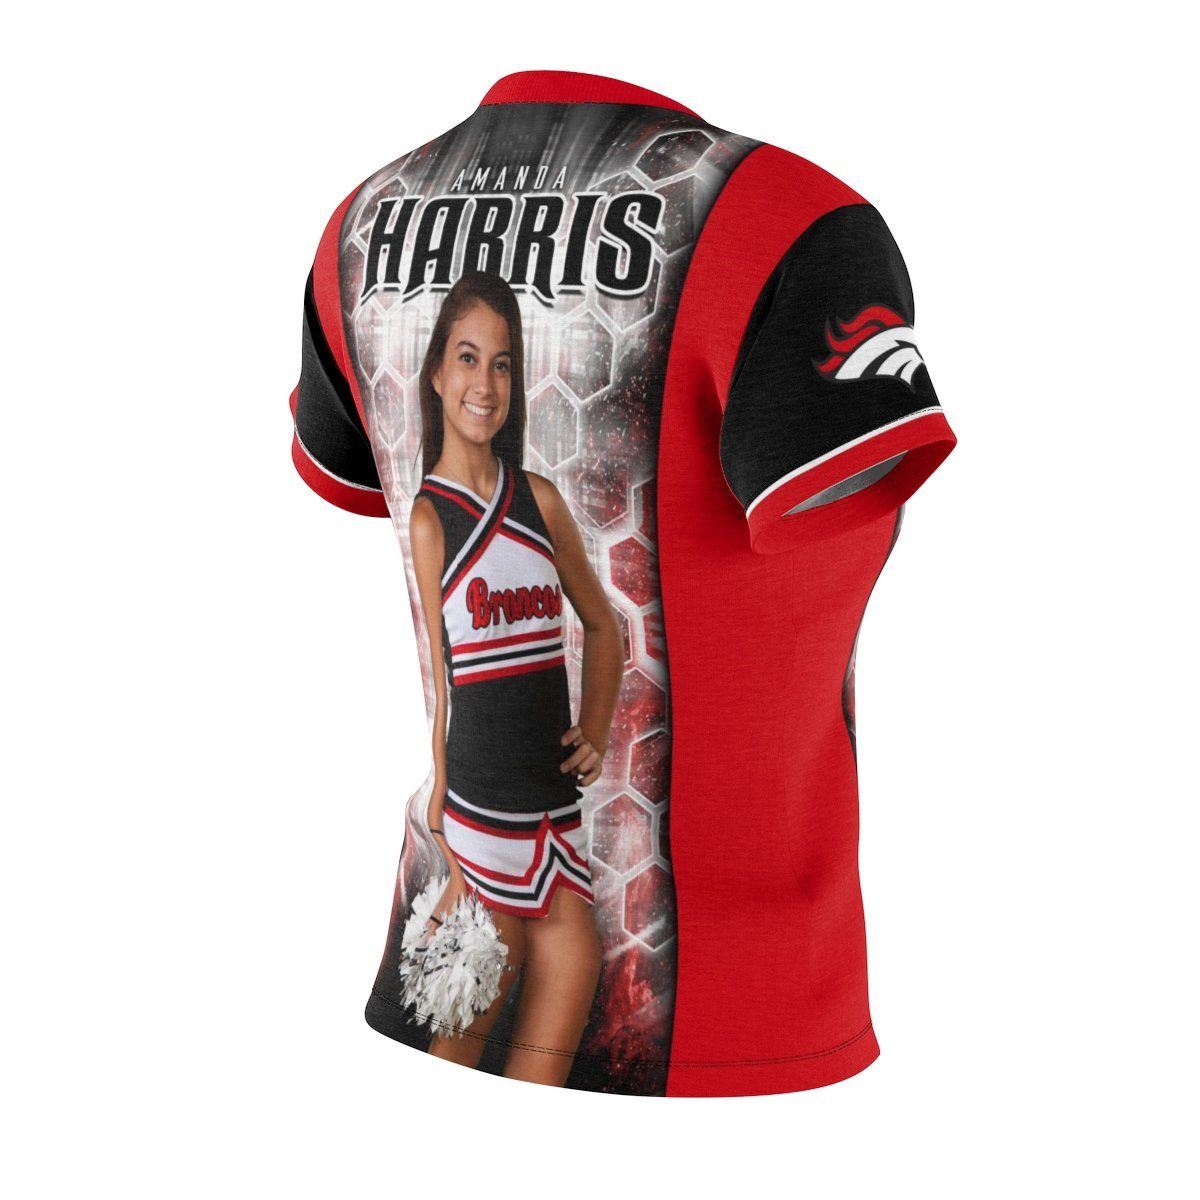 05 - Volume 5 - Women's Cut & Sew Extreme Sportswear Collection-Photoshop Template - PSMGraphix